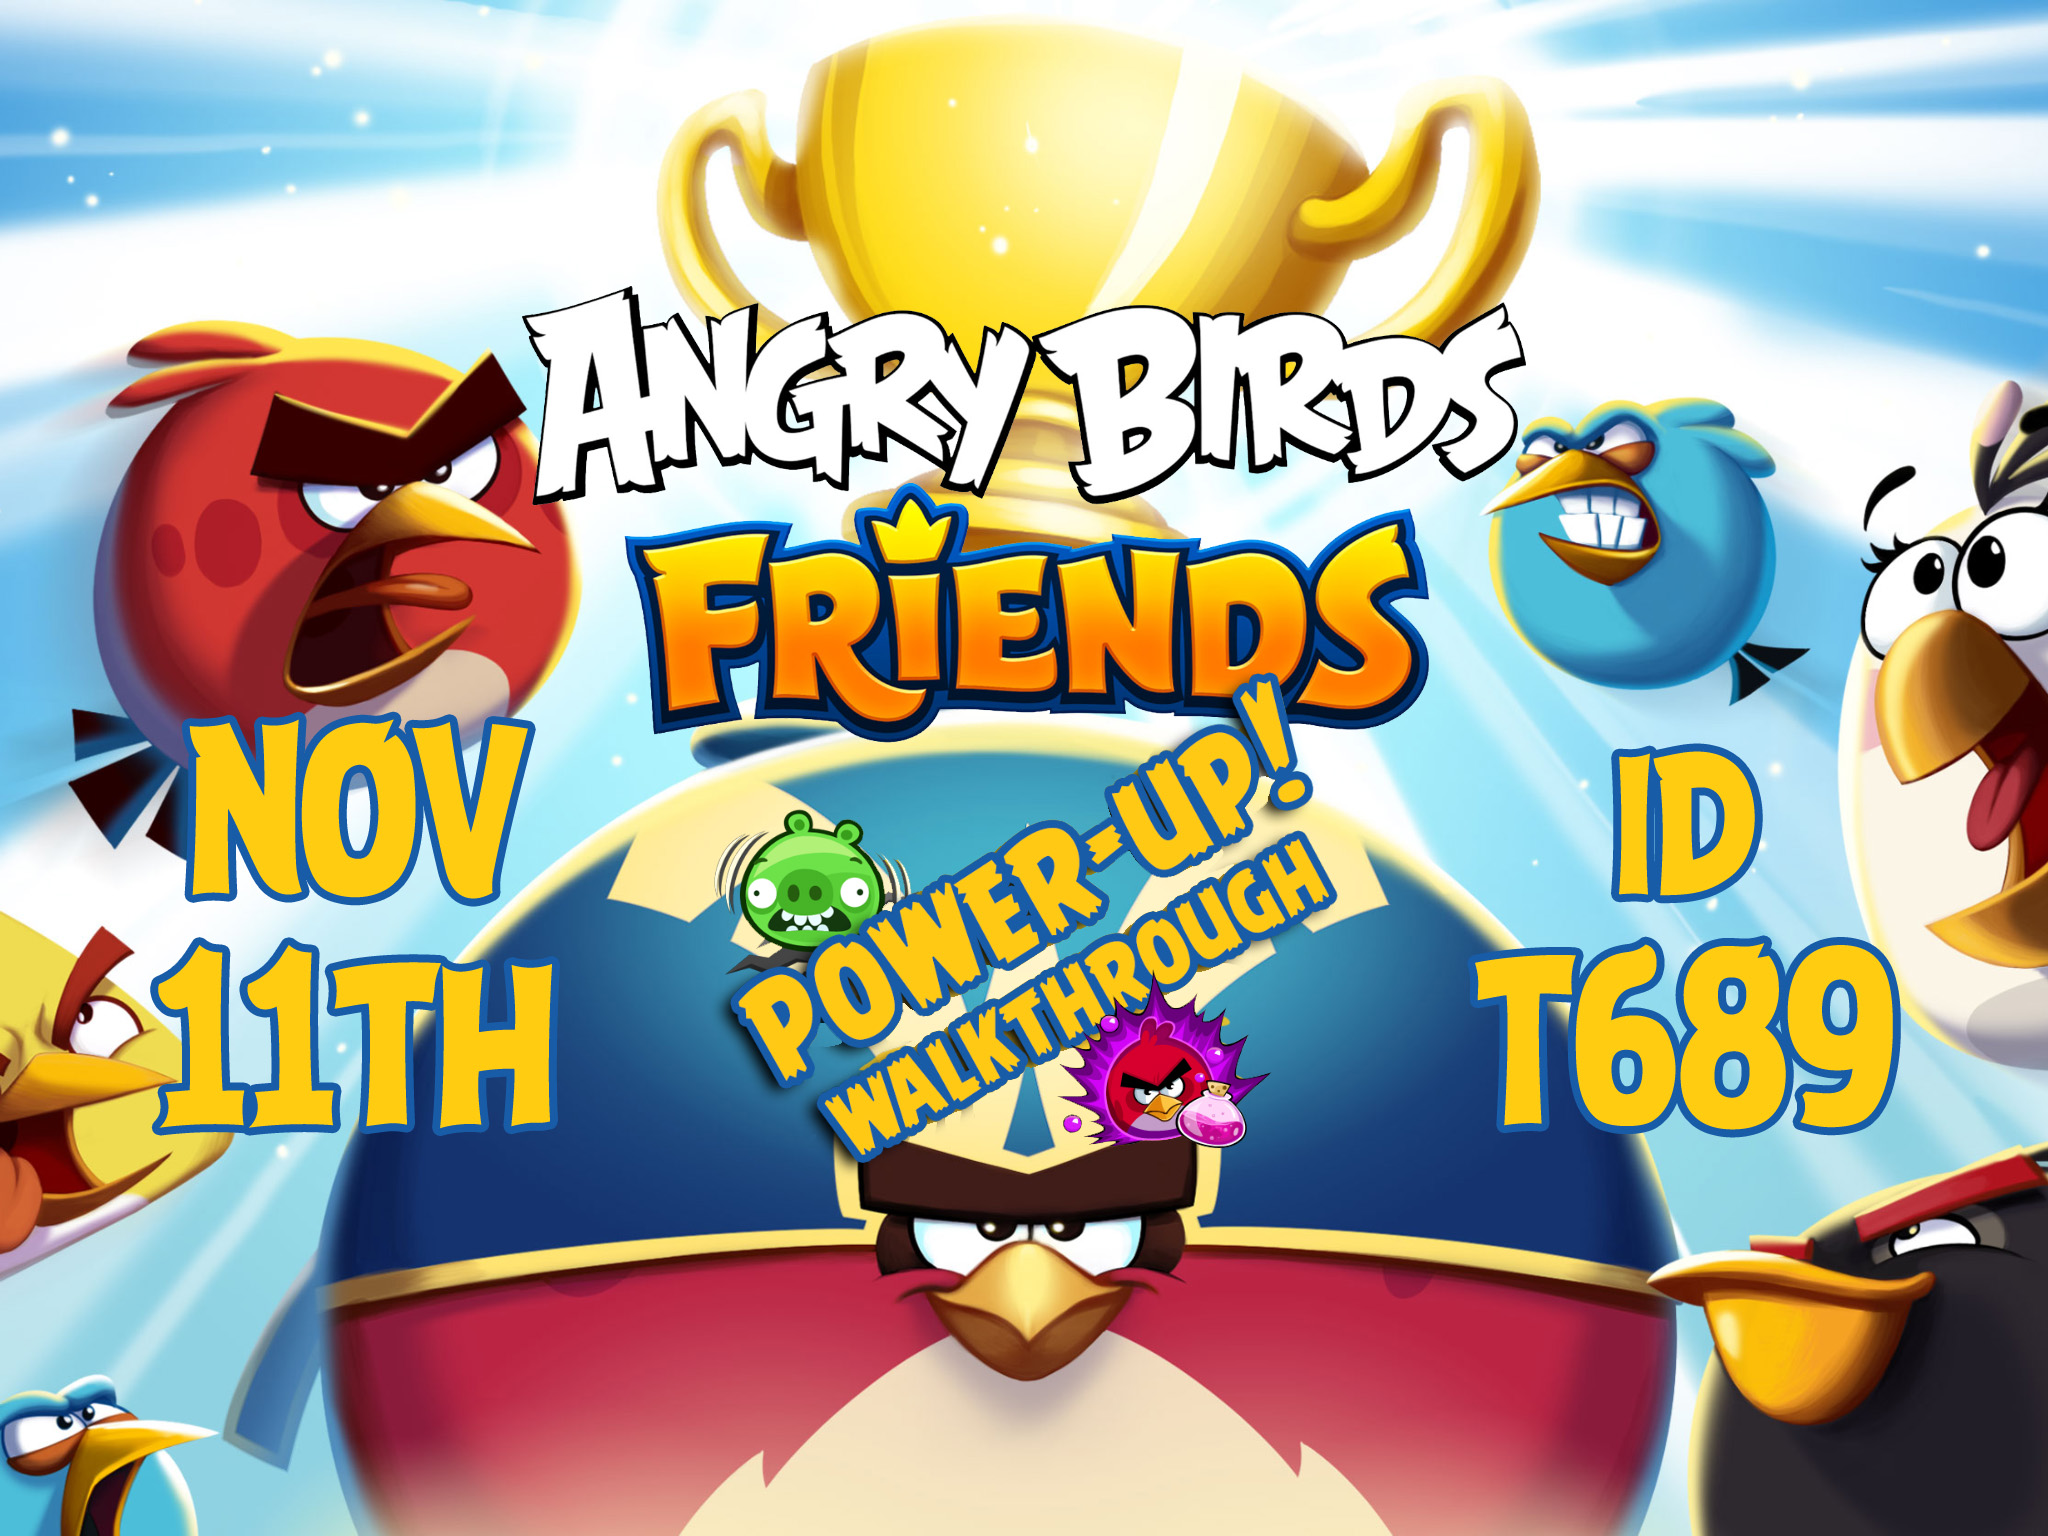 Angry-Birds-Friends-Tournament-T689-Feature-Image-PU